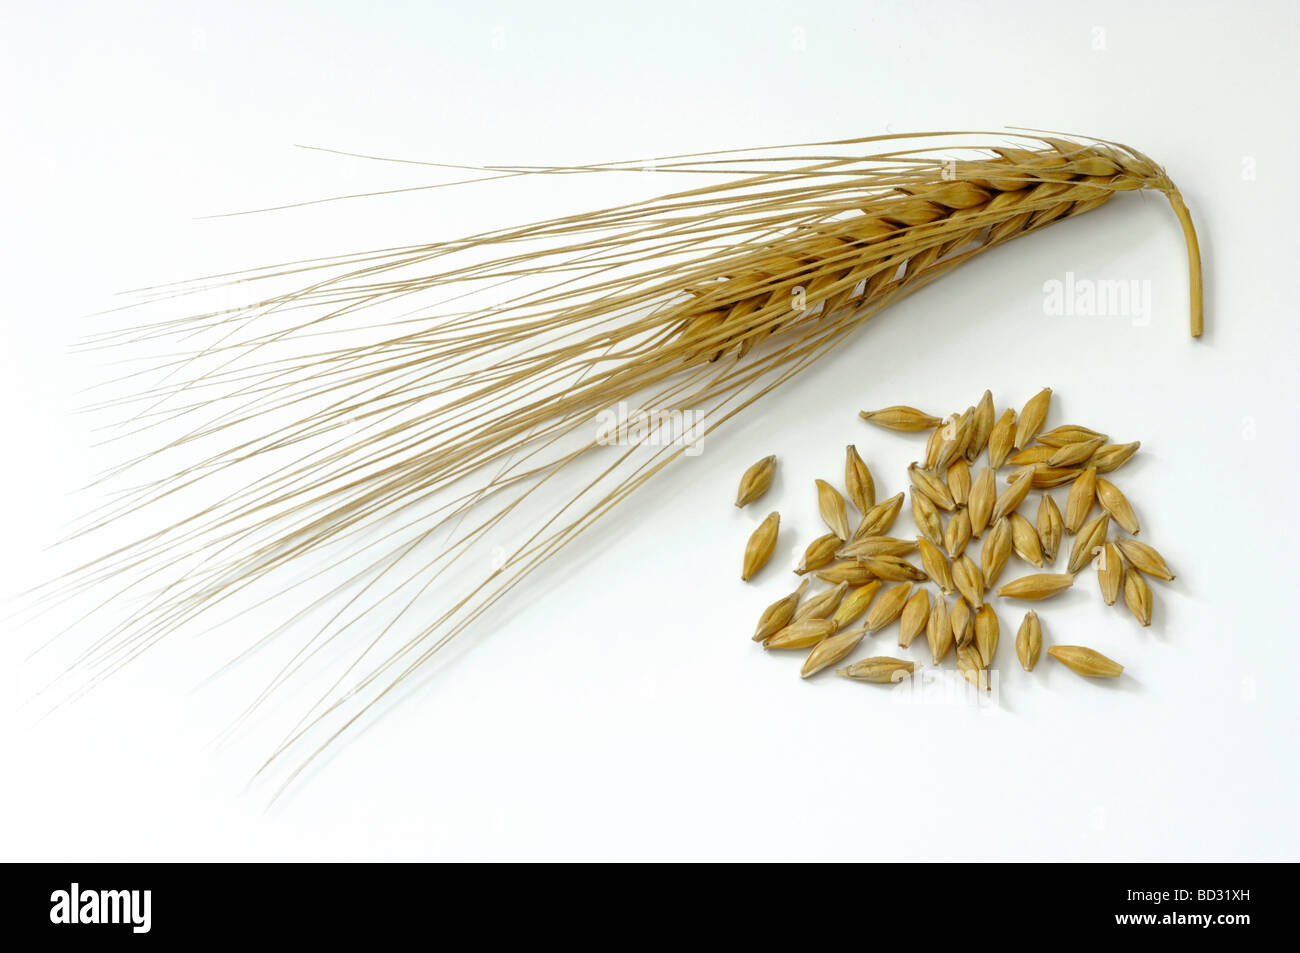 Barley (Hordeum vulgare), ripe ears and seeds, studio picture Stock Photo